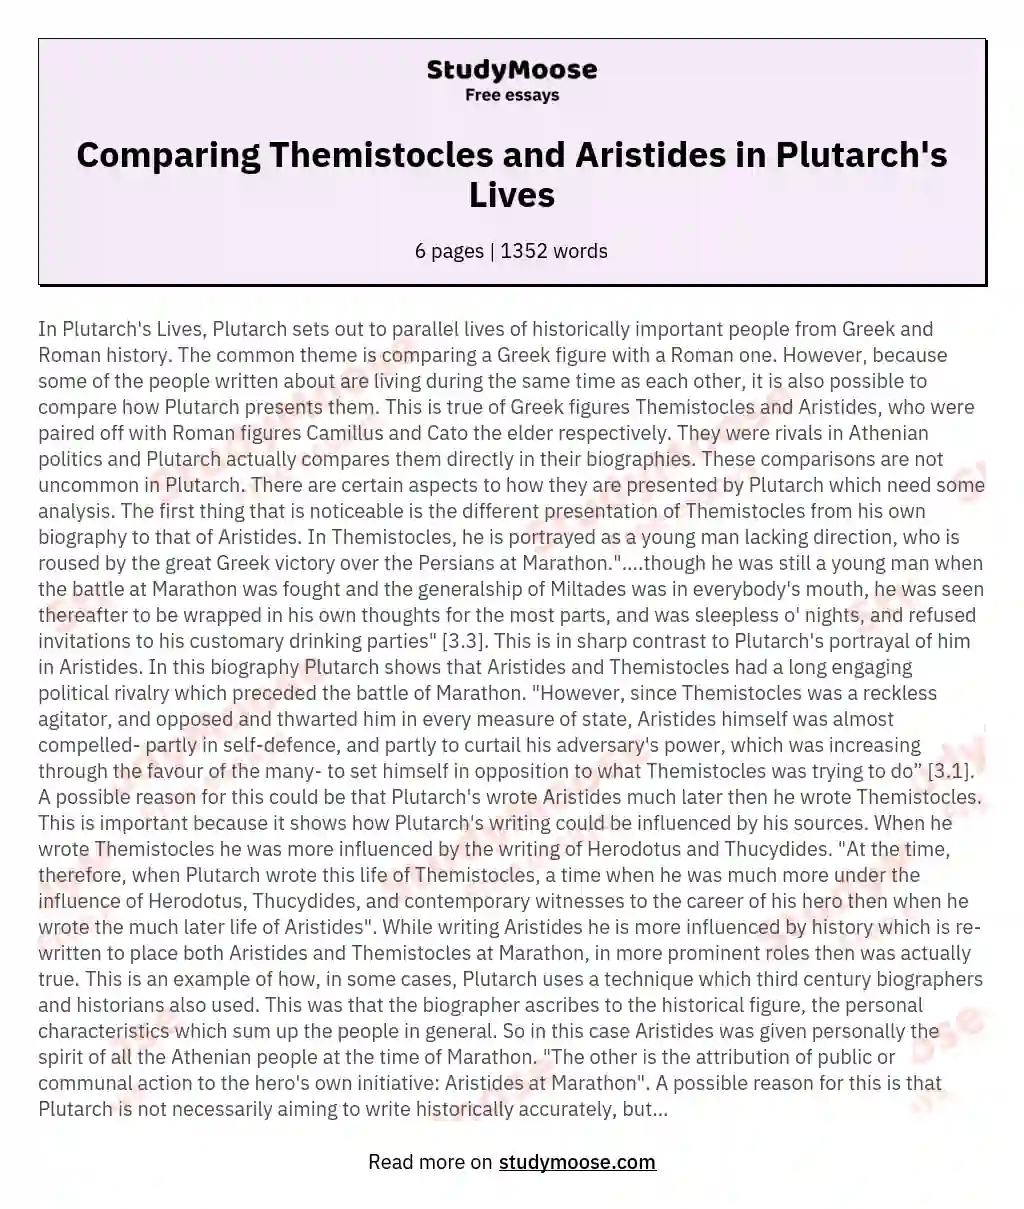 Compare and Contrast the Presentation of Themistocles and Aristides in Plutarch's Lives